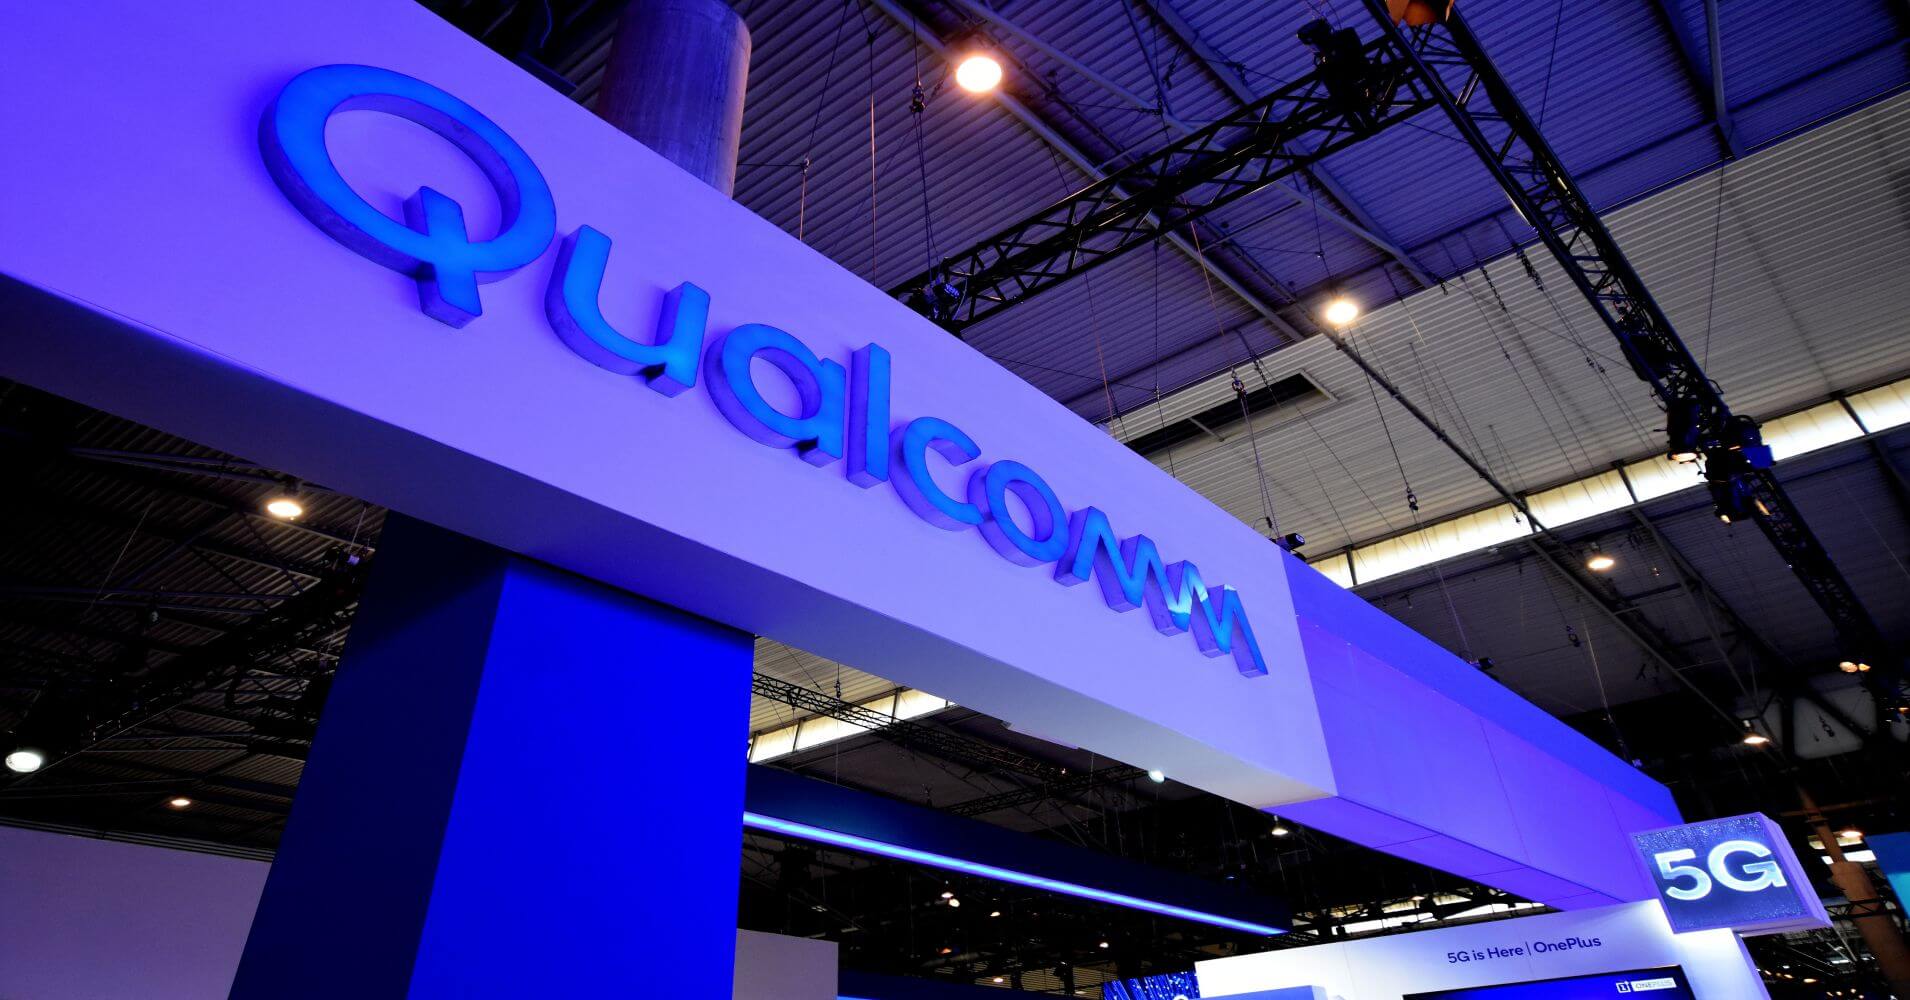 Qualcomm and Tencent join forces on mobile gaming hardware and software